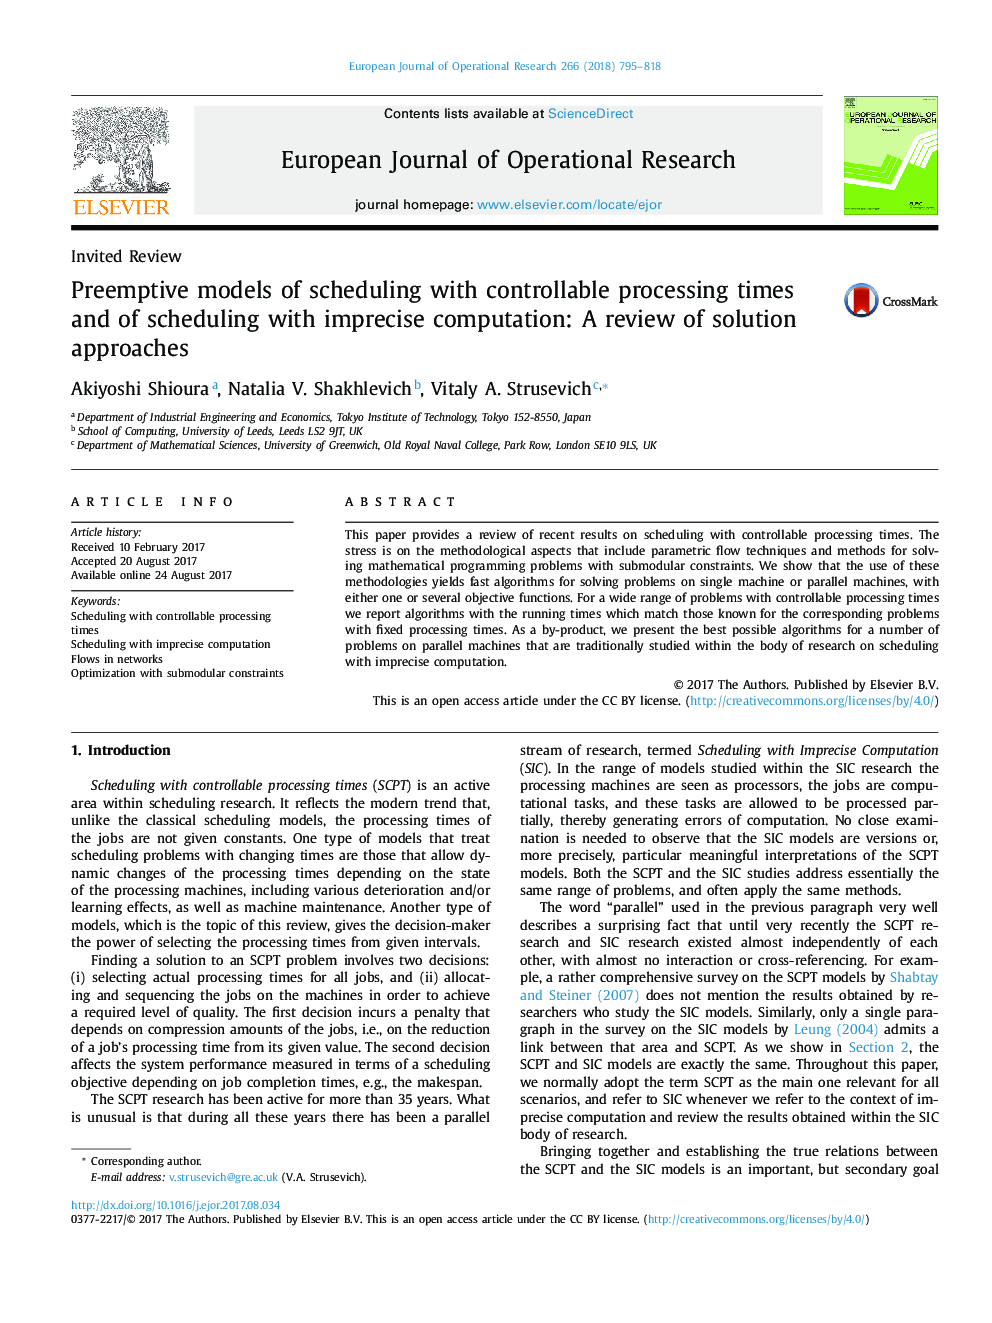 Preemptive models of scheduling with controllable processing times and of scheduling with imprecise computation: A review of solution approaches